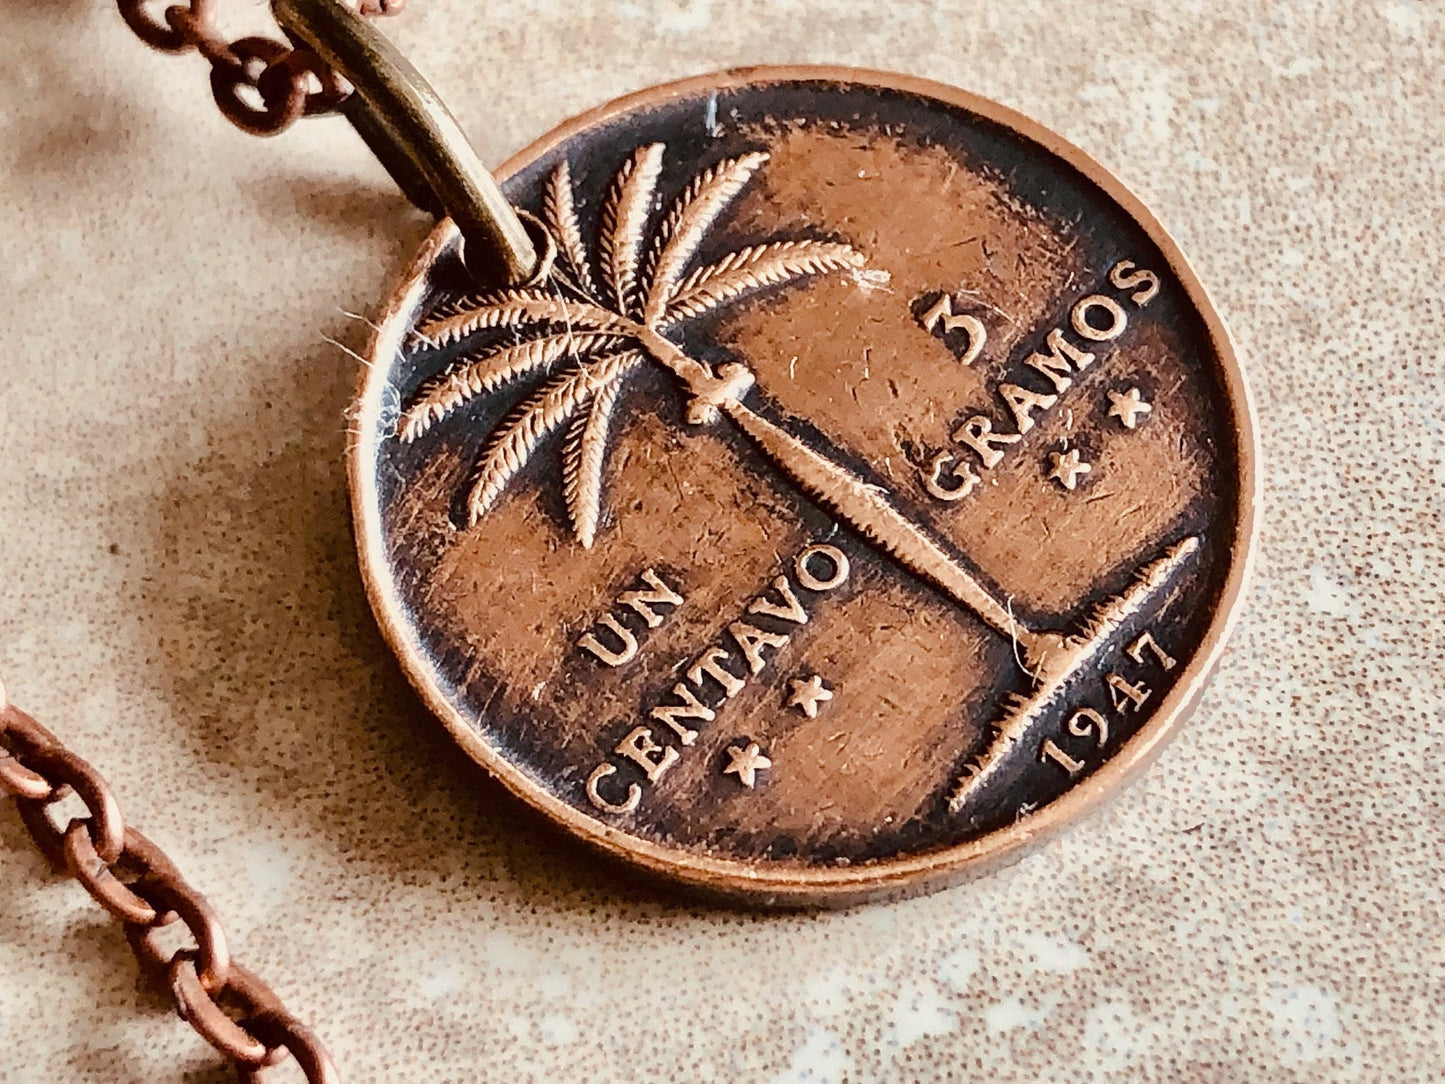 Dominican Republic Coin Necklace 1 Centavos Pendant Personal Vintage Handmade Jewelry Gift Friend Charm For Him Her World Coin Collector